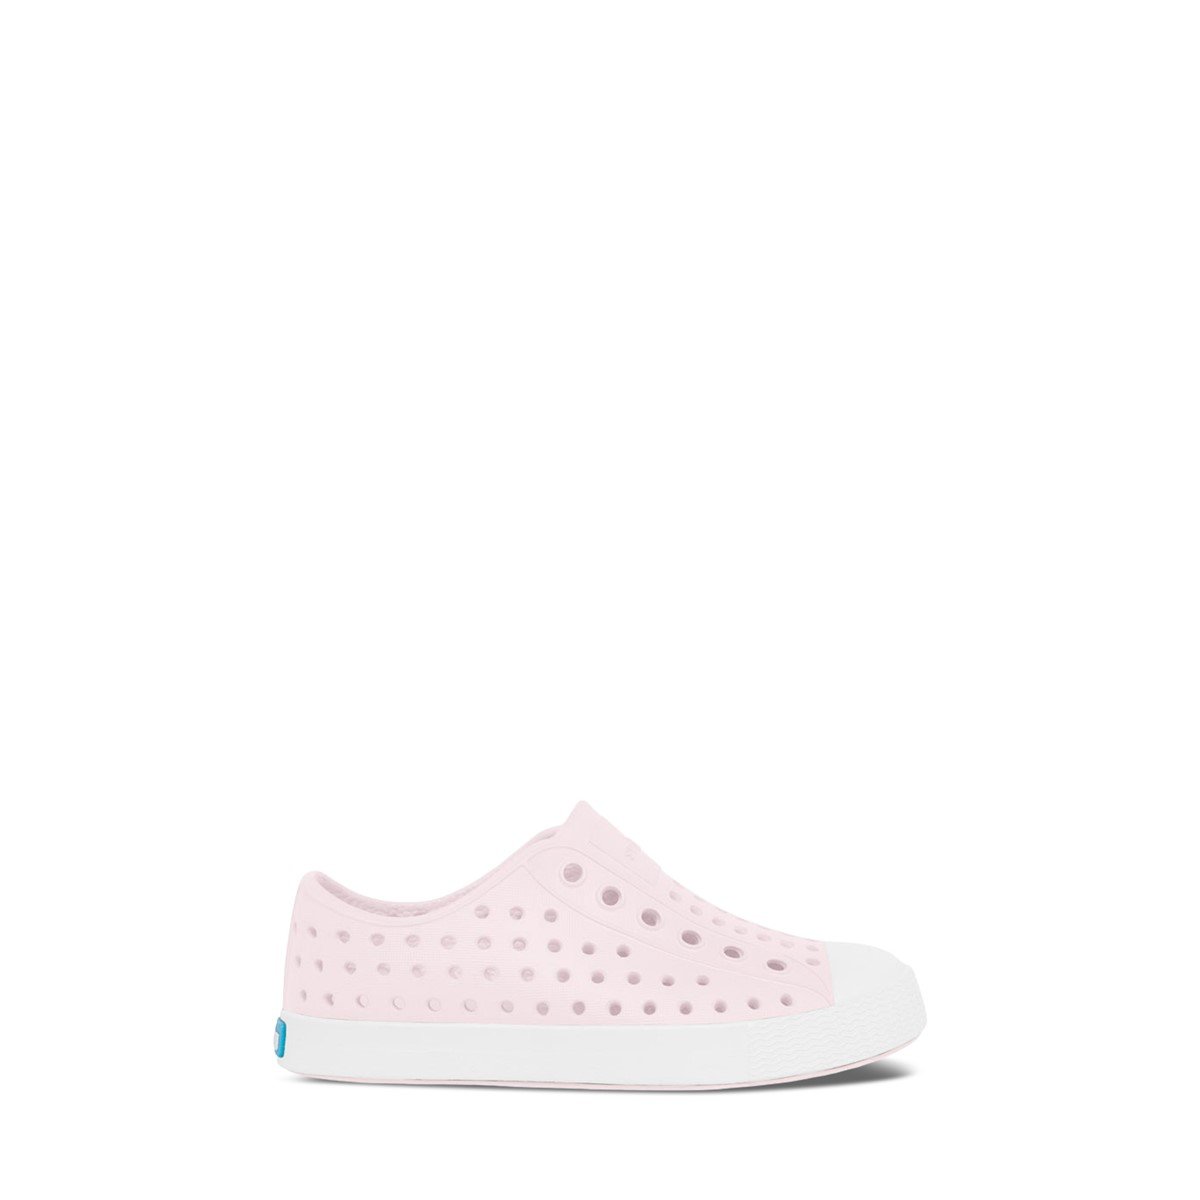 Toddler's Jefferson Slip-On Shoes in Pink/White